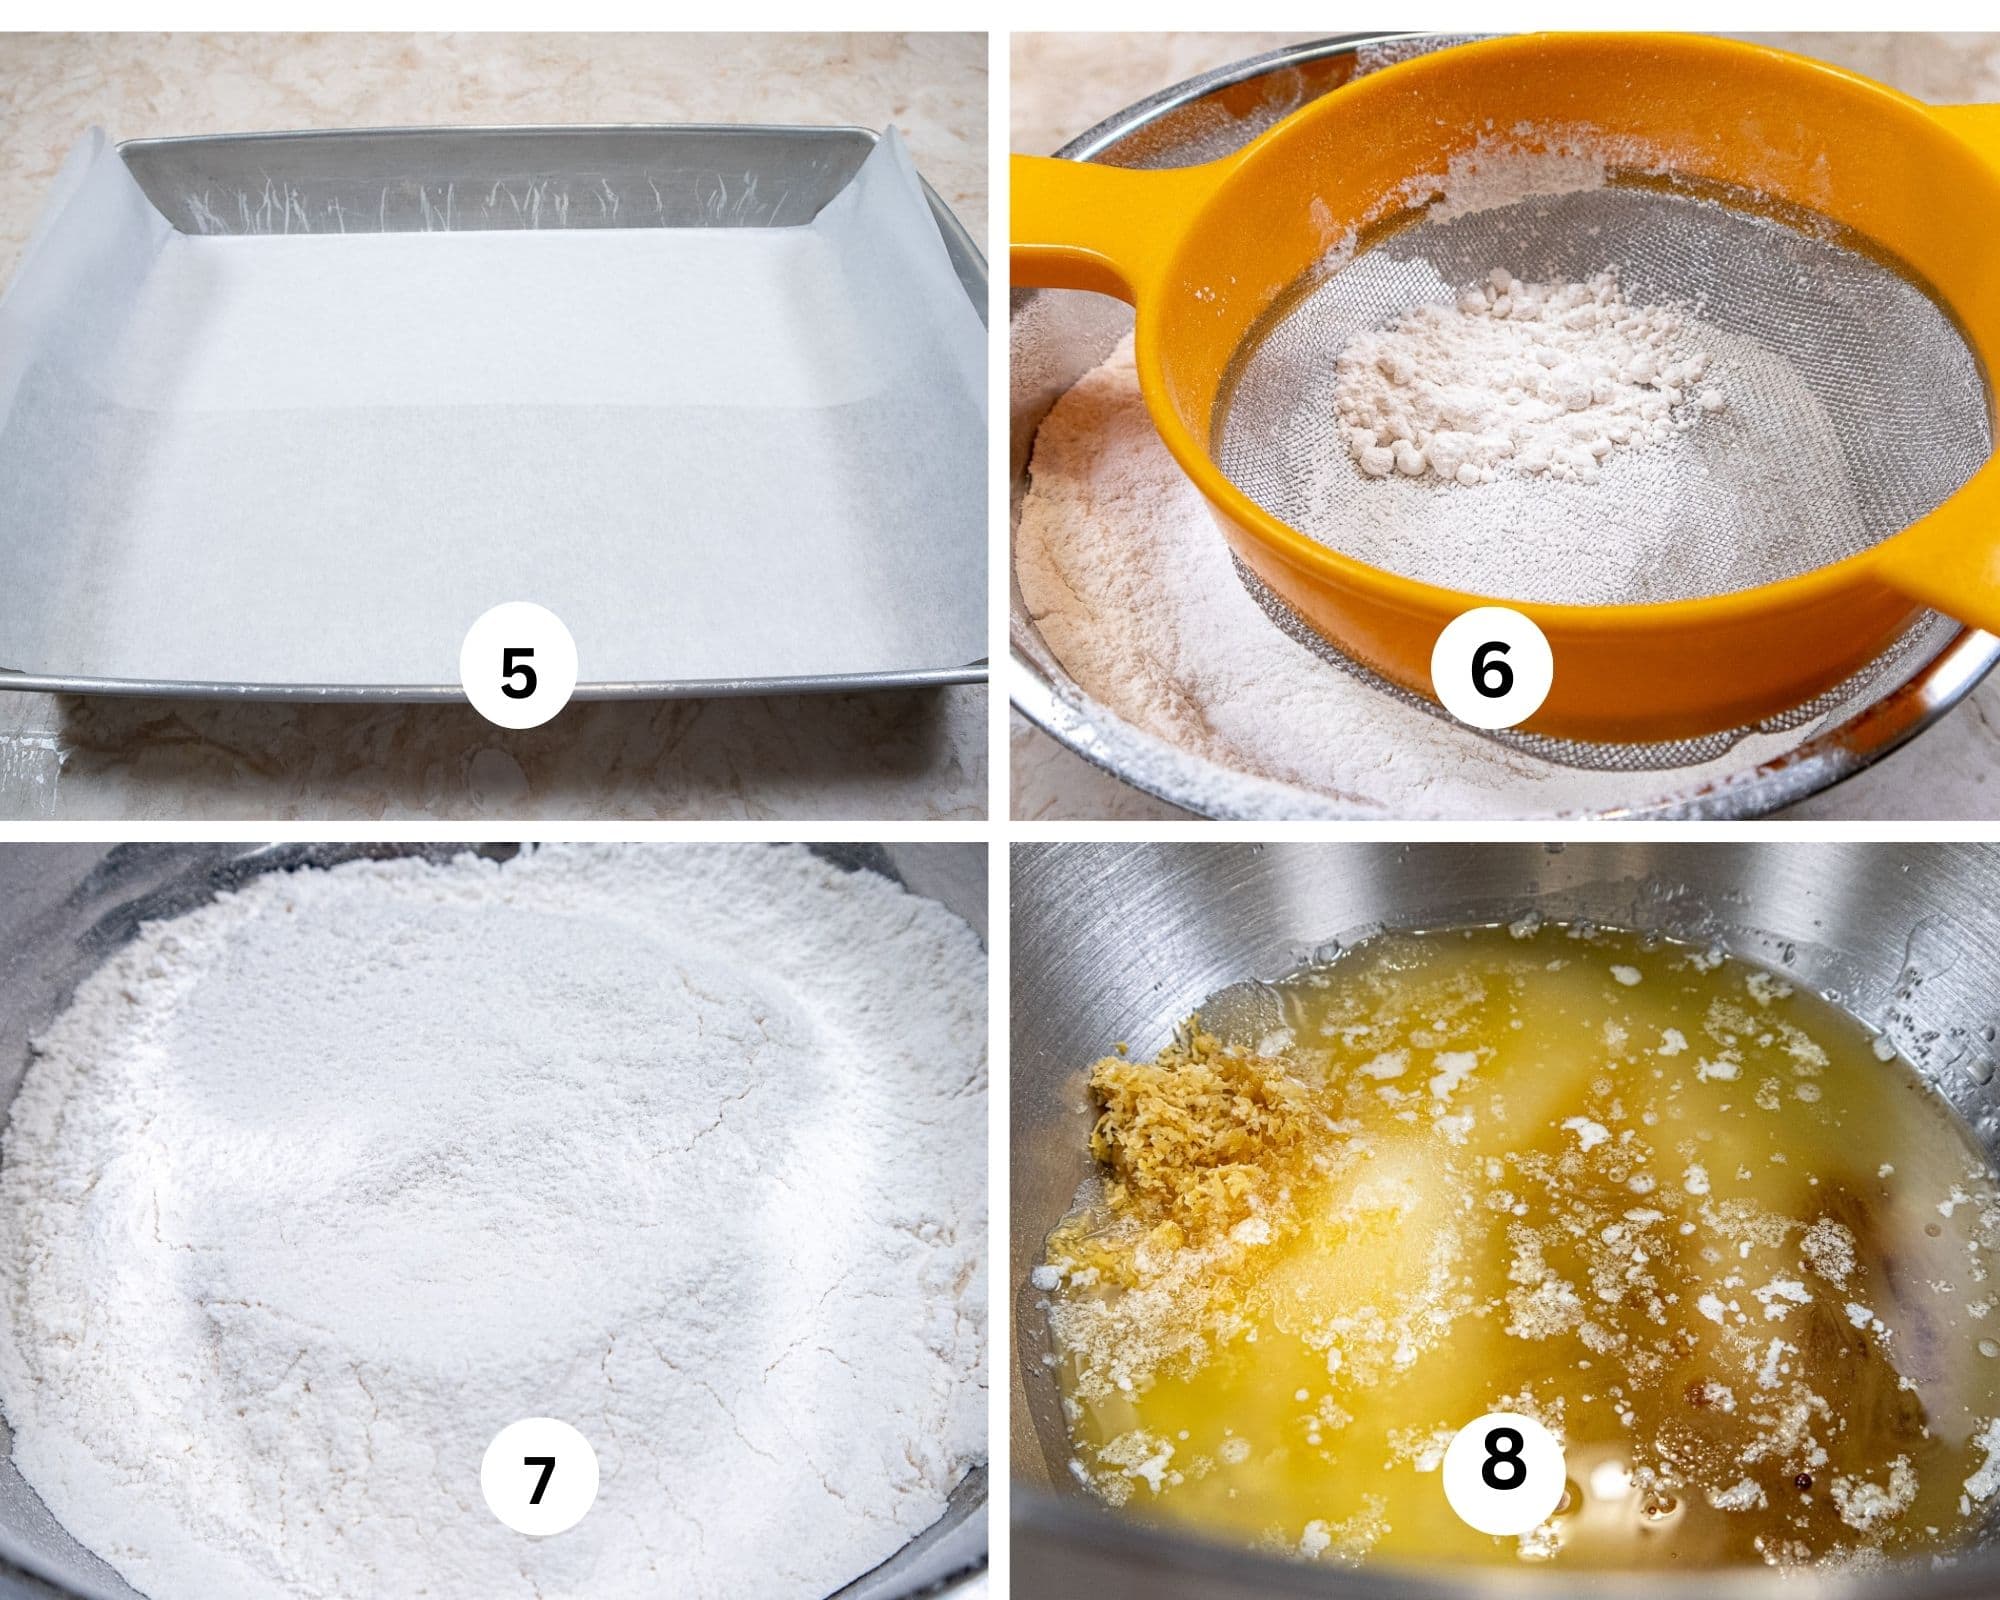 The first collage for the cake shows the panlined with paper, the cake flour being sifted, the dry ingredients whisked together and the wet ingredients in a mixing bowl.